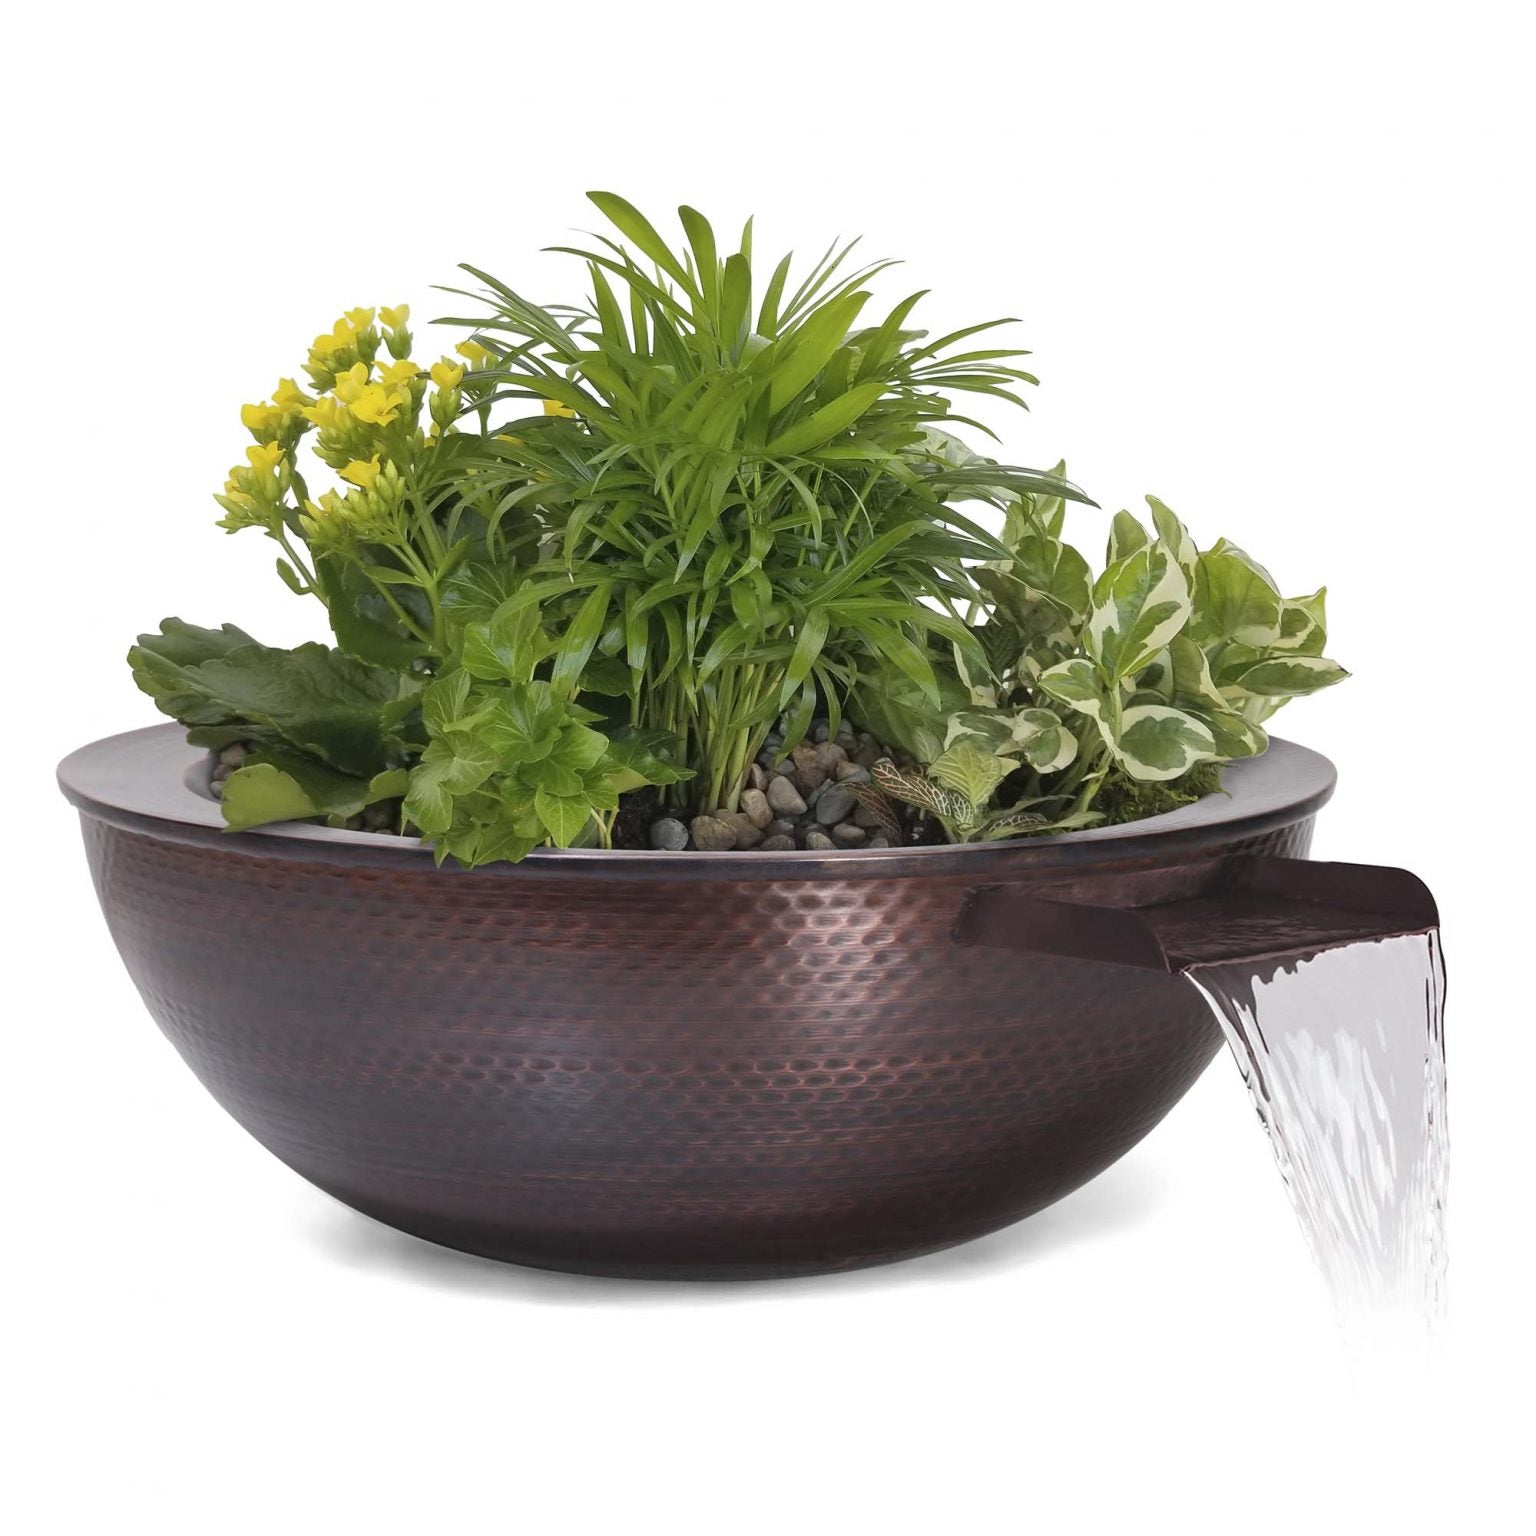 The Outdoor Plus Sedona Planter & Water Bowl Hammered Copper OPT-27RCPRPW - Serenity Provision